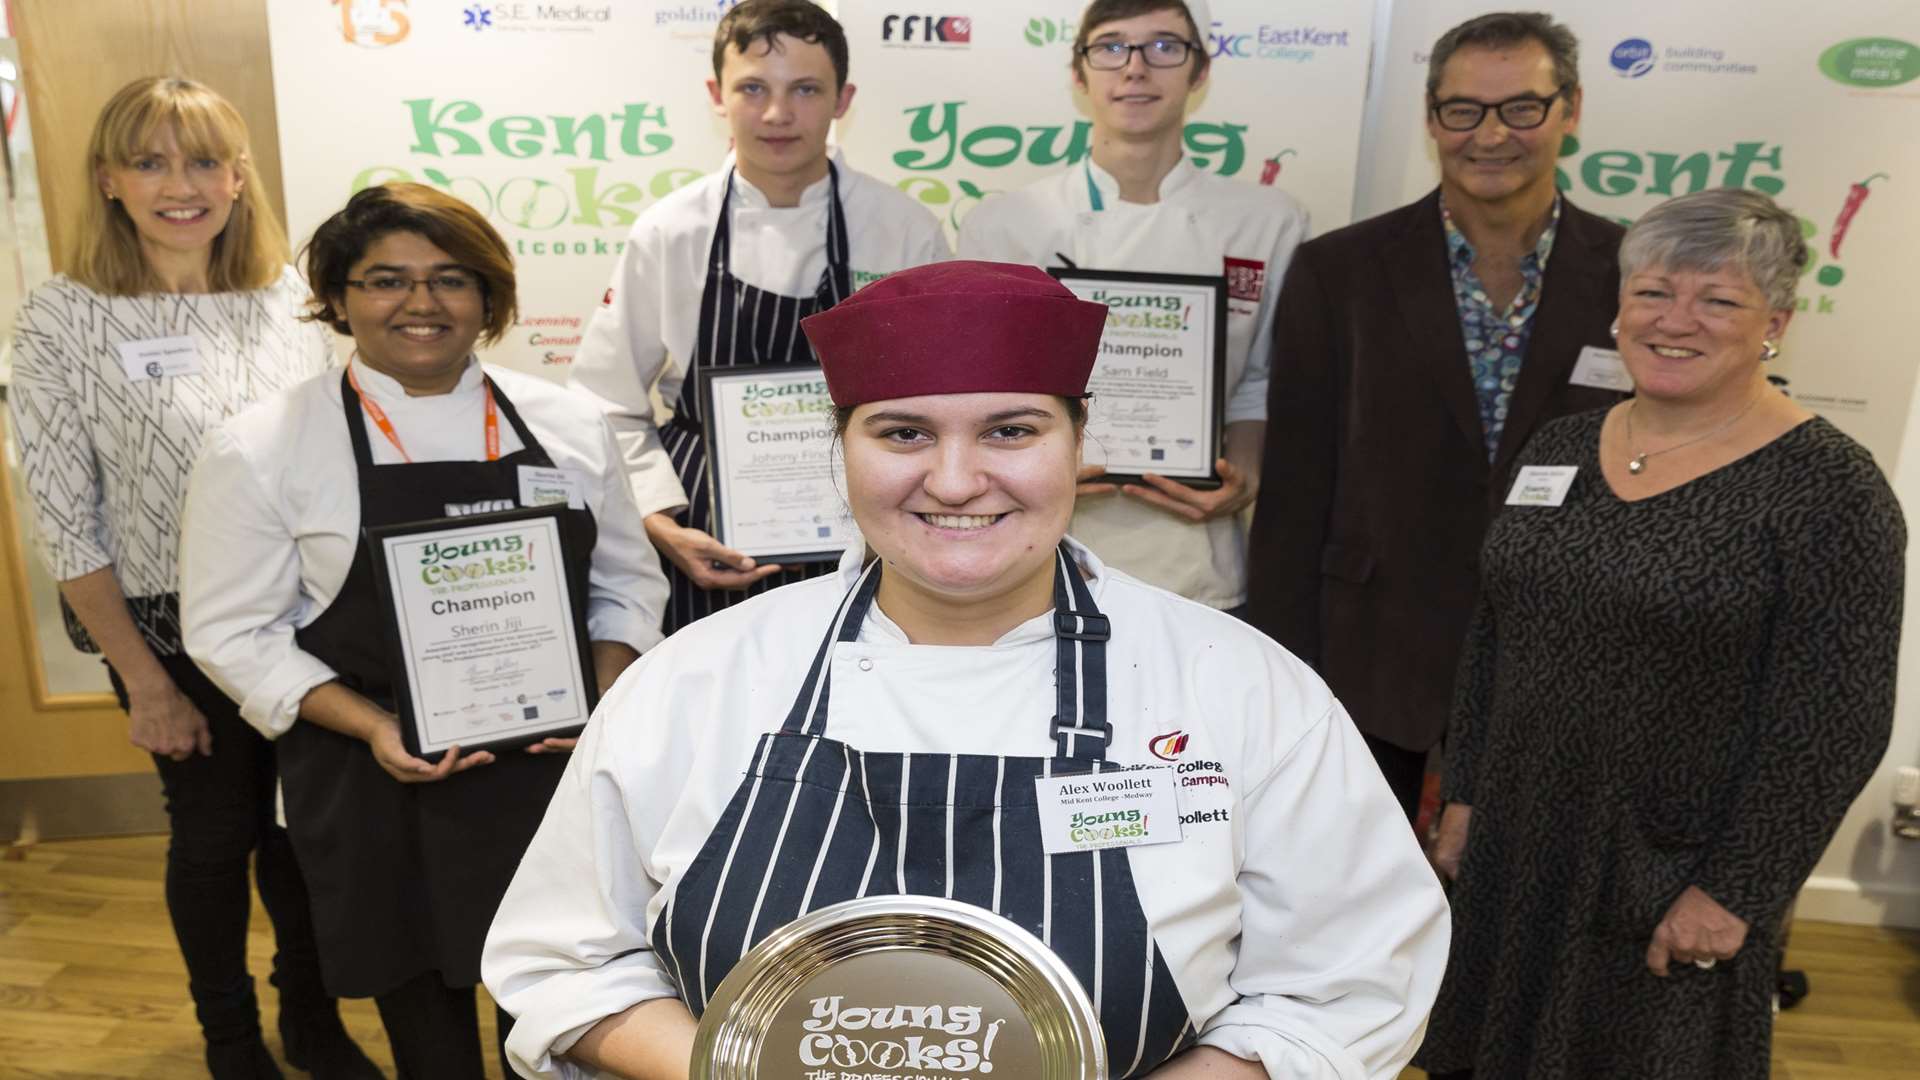 Winner Alex Woollett from Mid Kent College, Medway, with finalists and supporters at the Young Cooks Professionals 2017 contest at Swale Skills Centre, Sittingbourne.